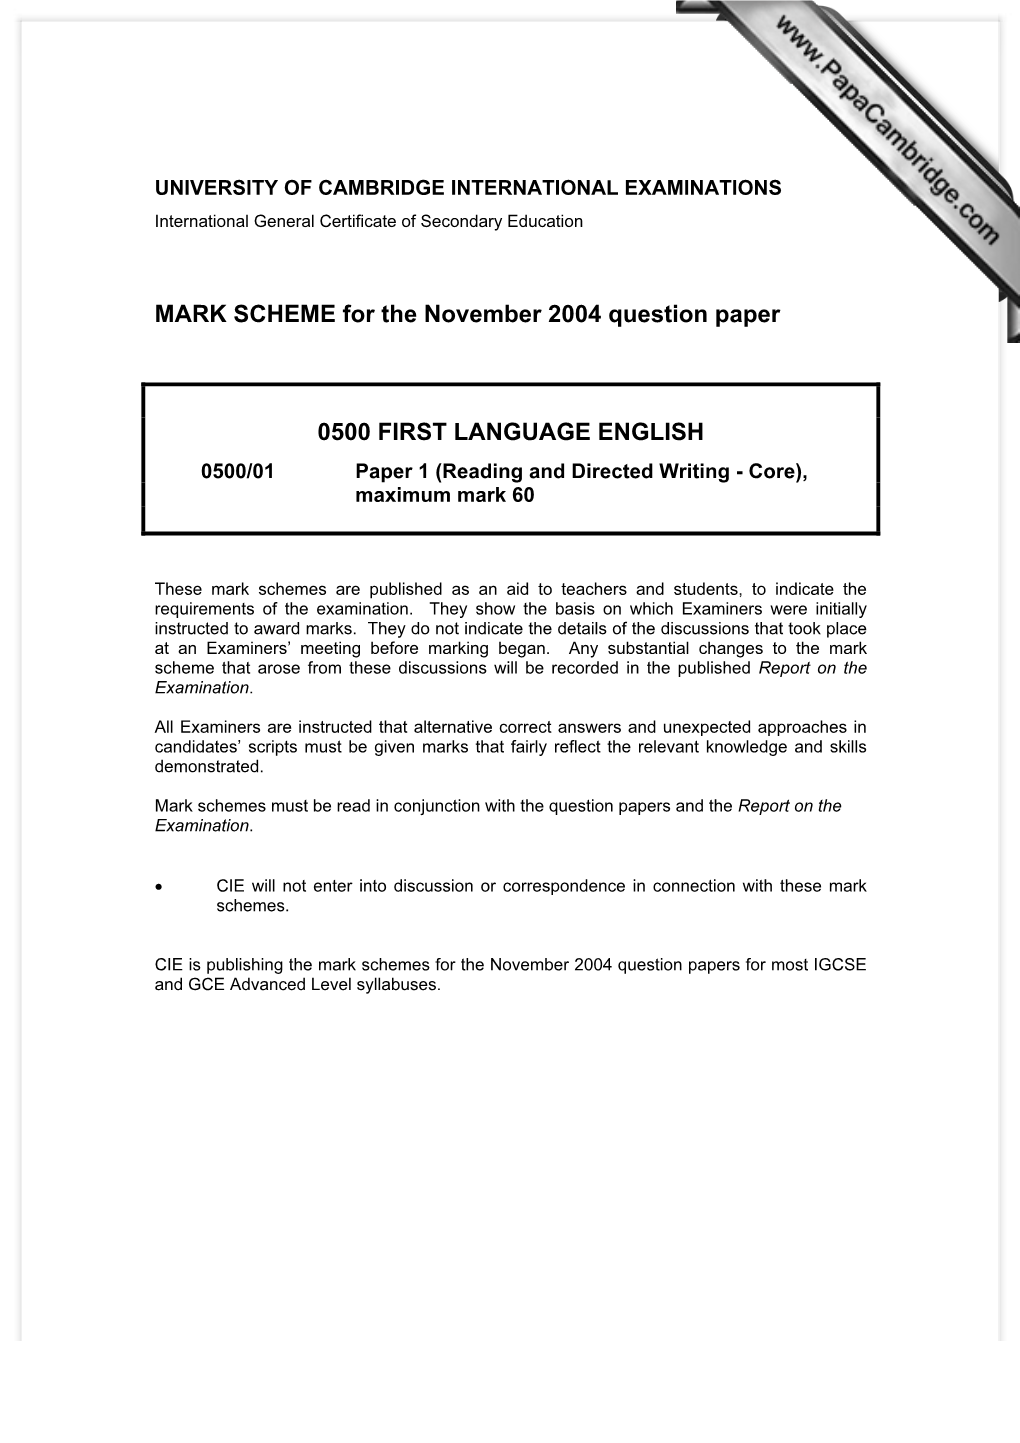 MARK SCHEME for the November 2004 Question Paper 0500 FIRST